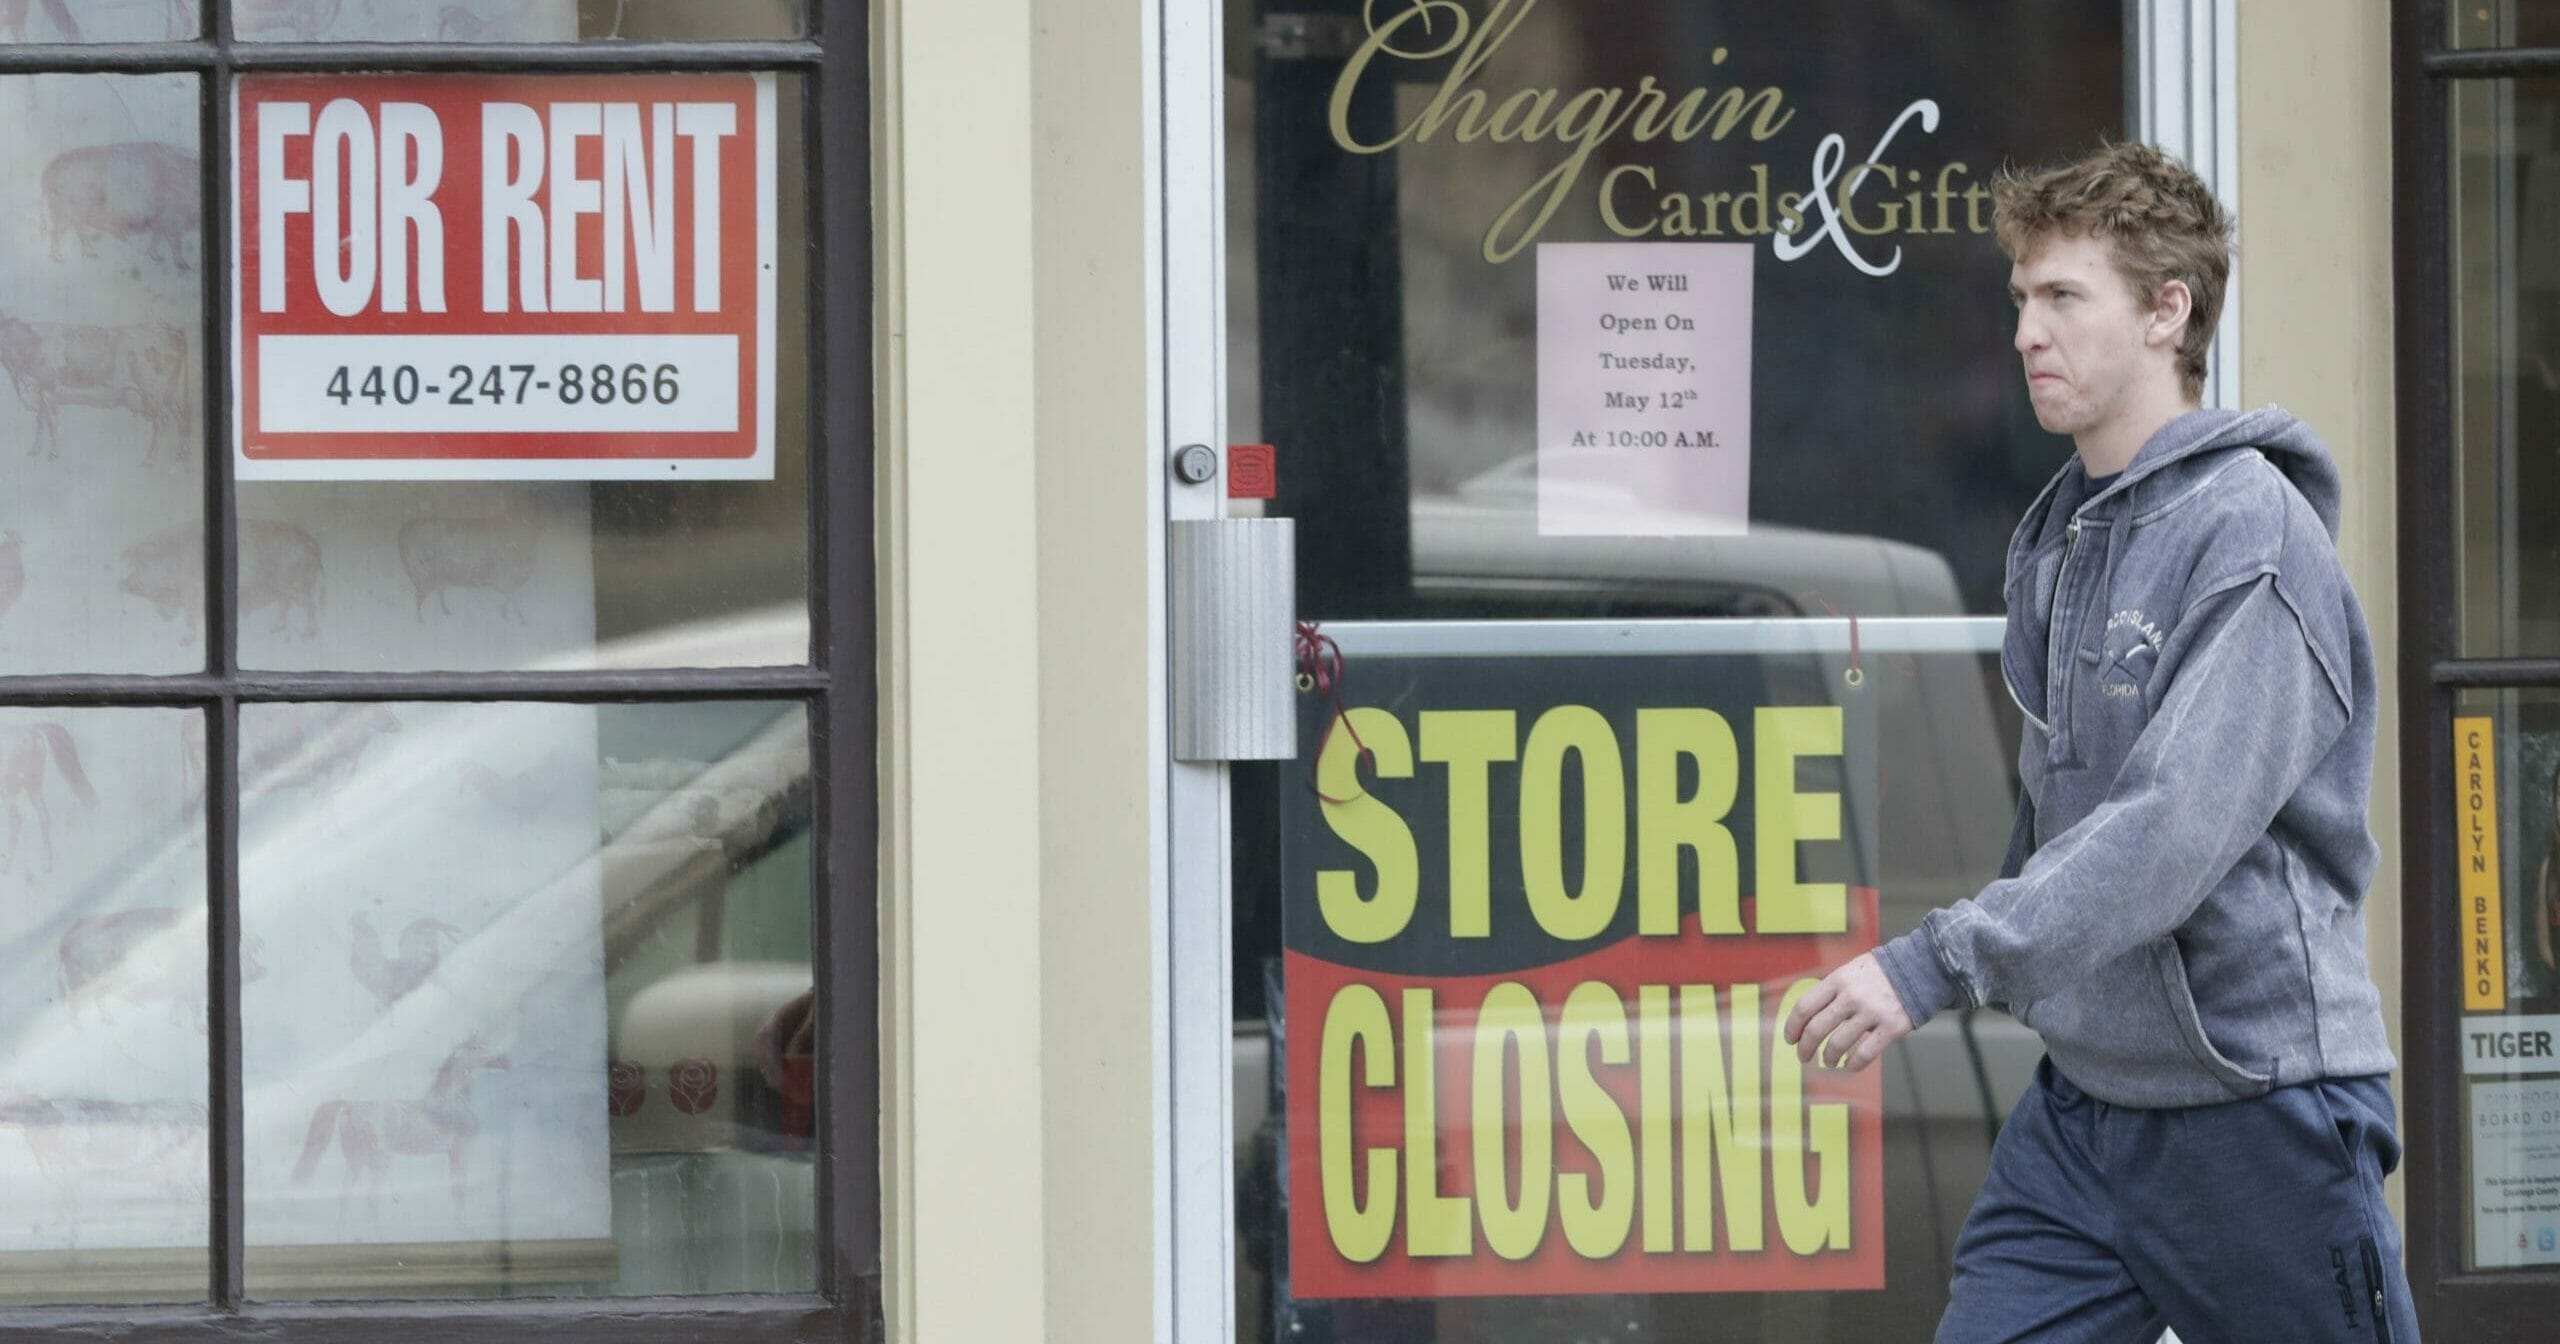 A man walks past a closed business in Chagrin Falls, Ohio, on April 29, 2020.